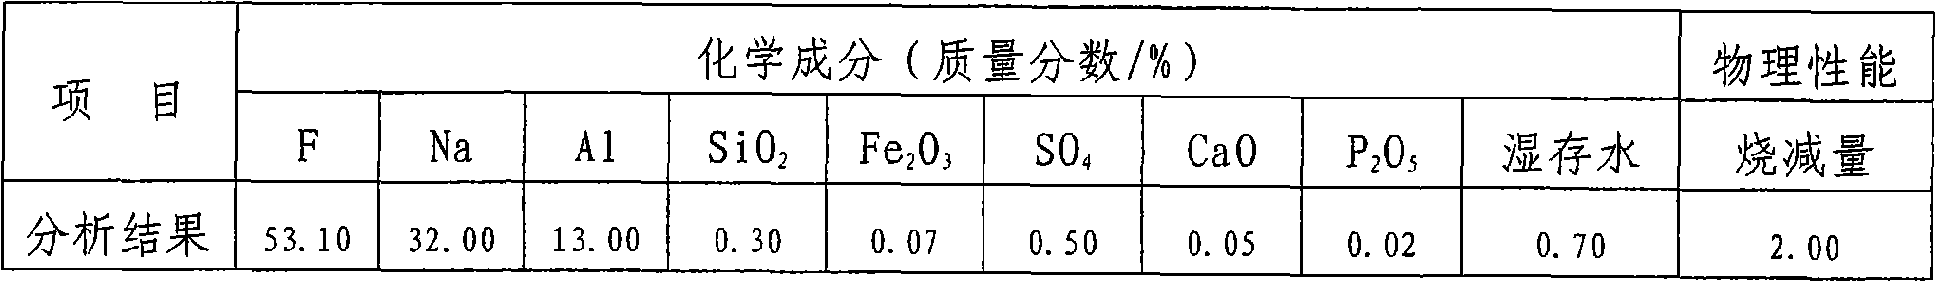 Method for preparing cryolite and coproducing soluble glass by using hydrof luorosilicic acid